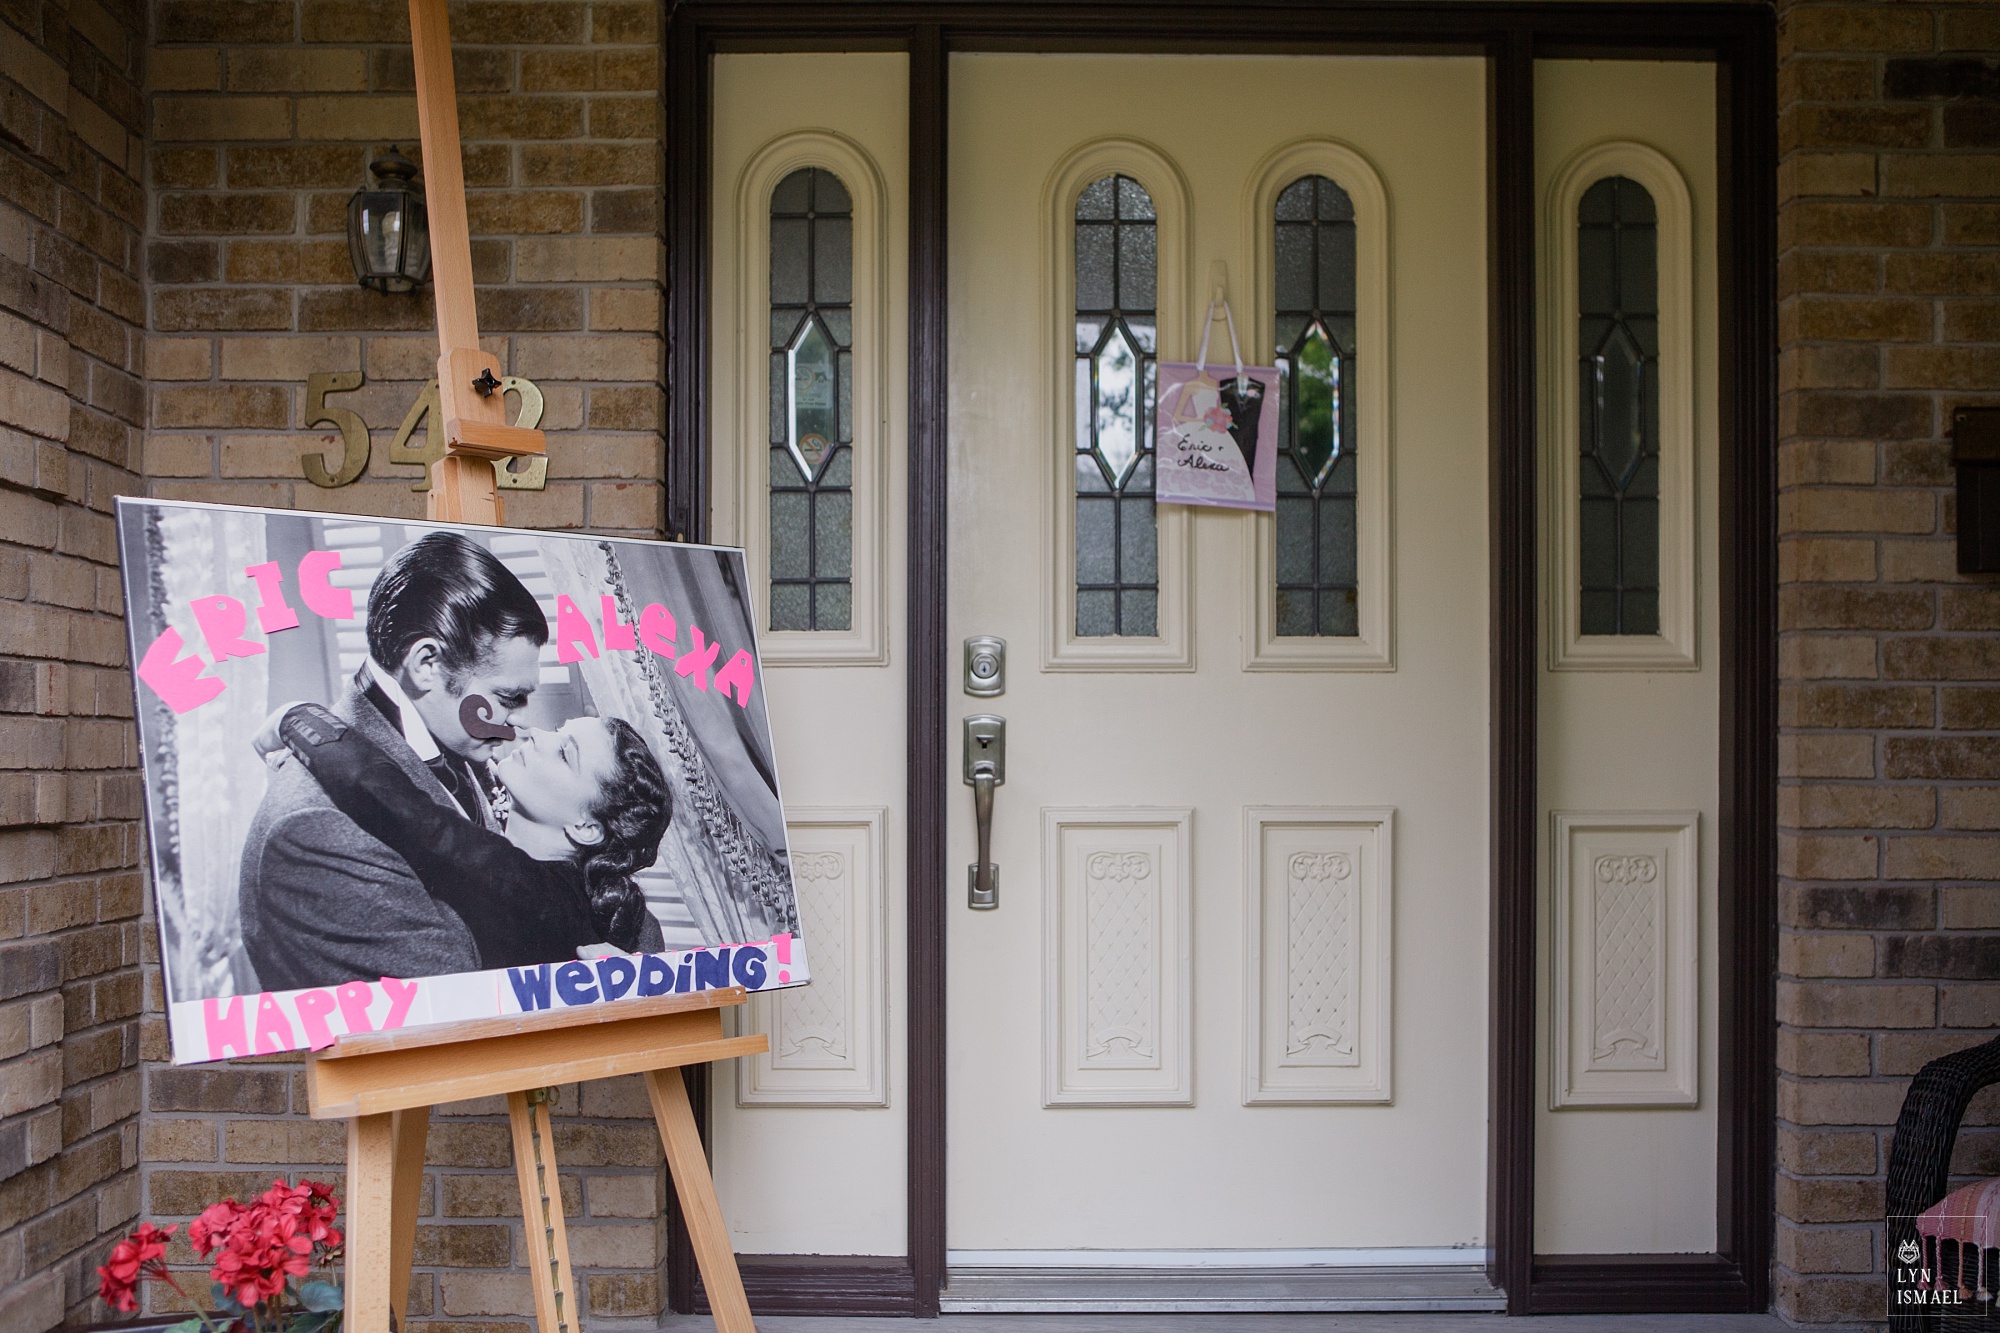 A poster outside the groom's house on his wedding day.